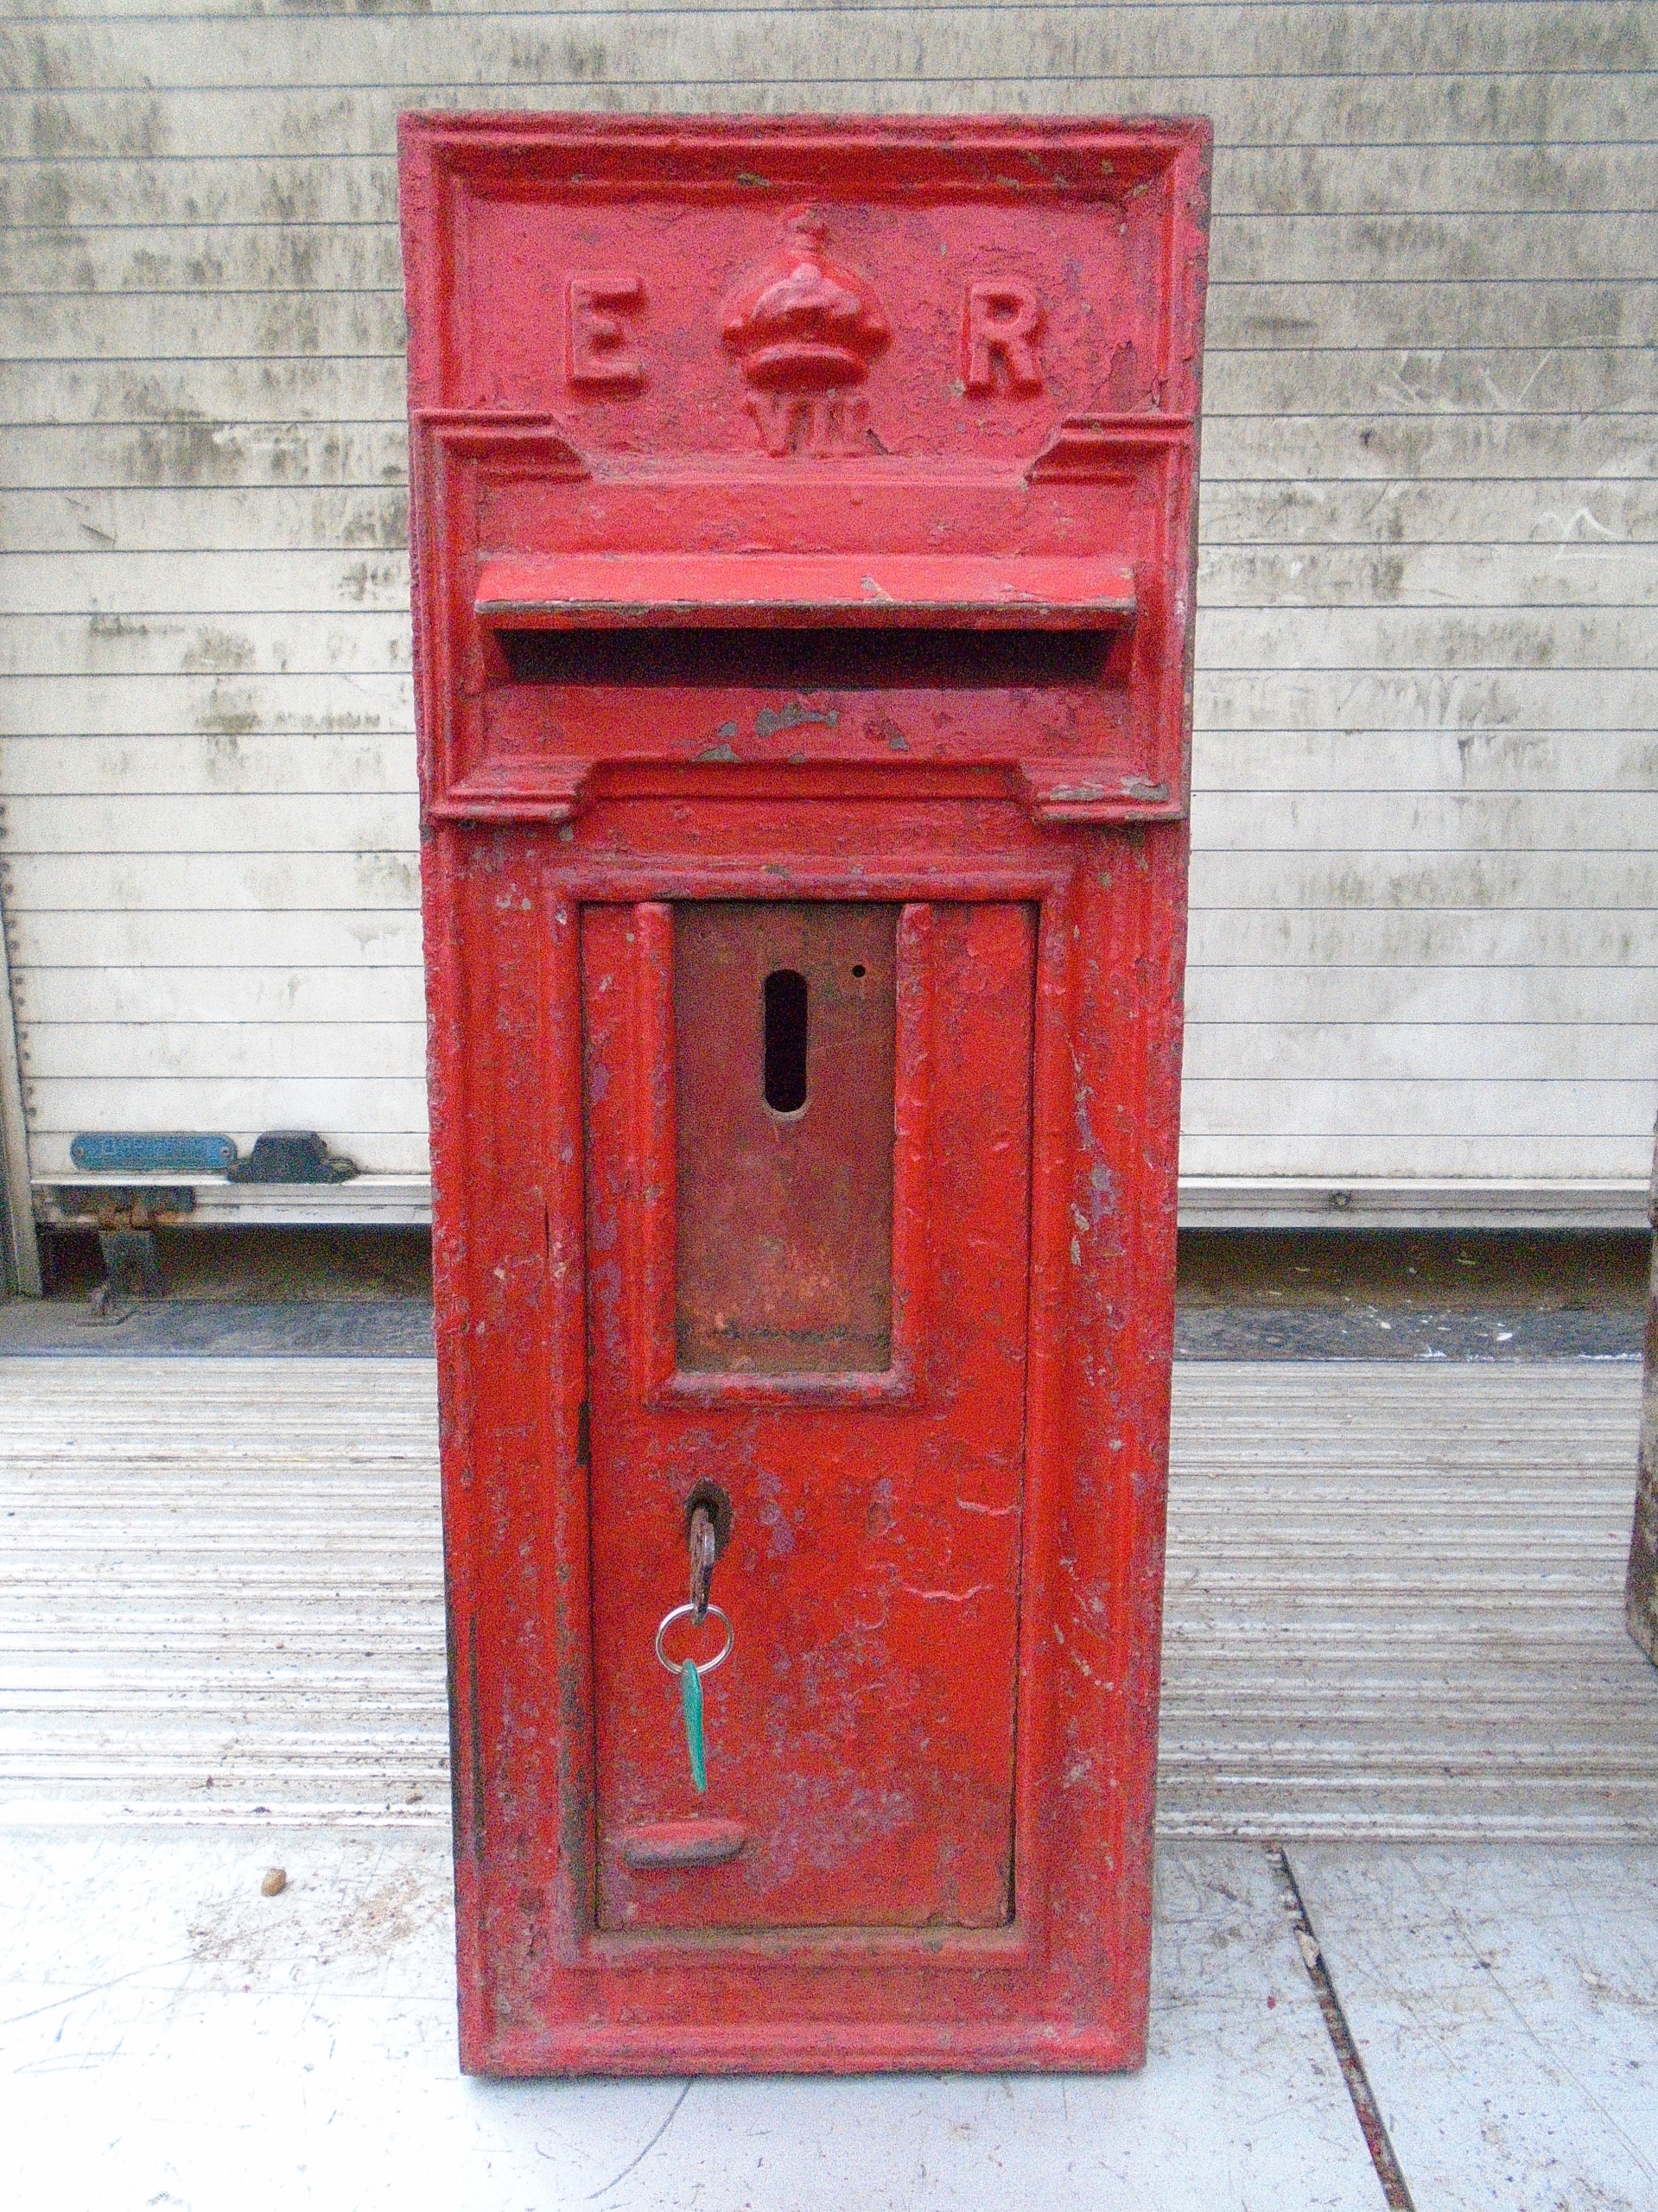 An Original Edward VII (1901-1910) Wall Mounted Post Box Complete with ...